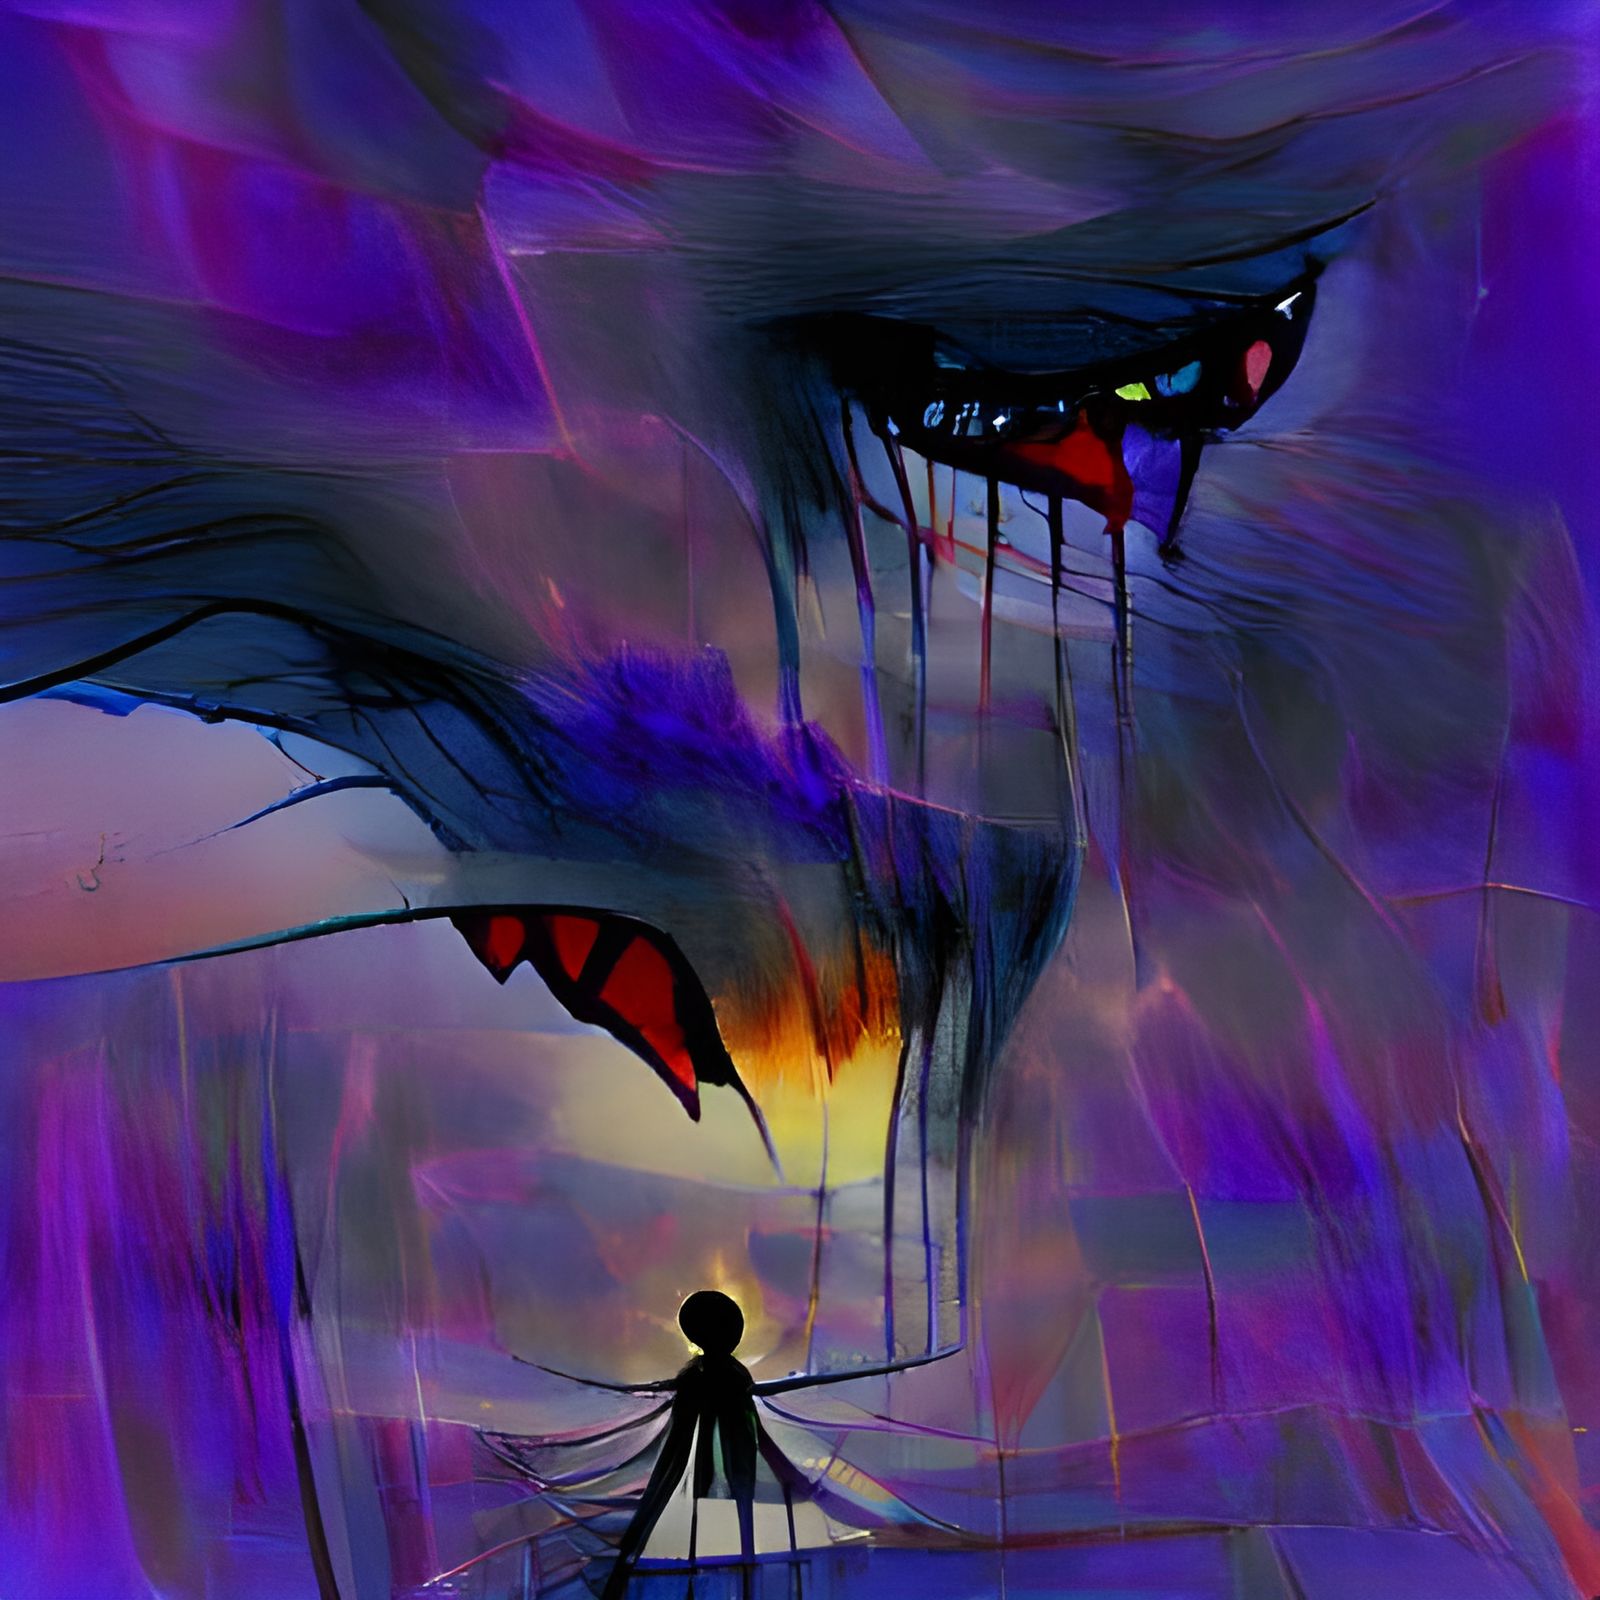 Fearful Ends